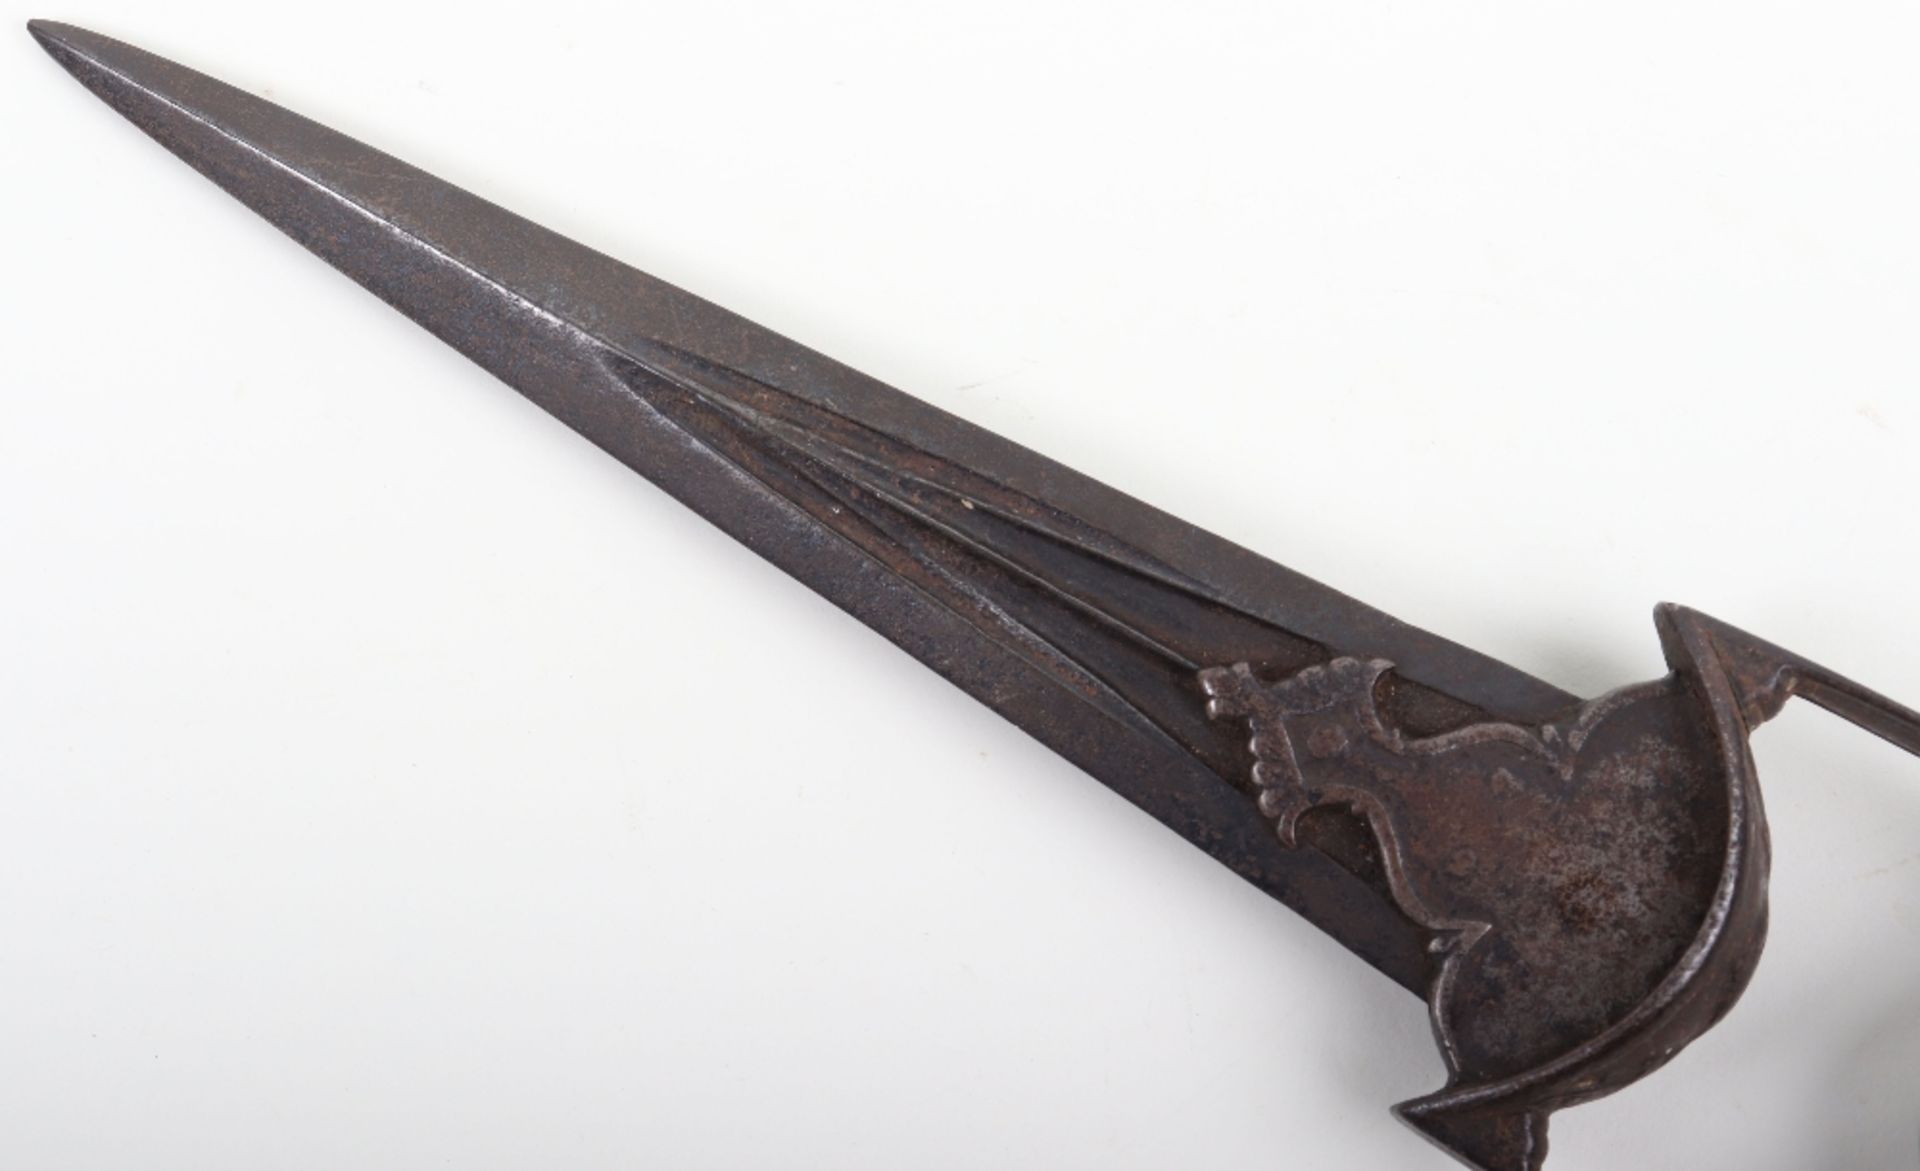 Indian Dagger Katar from the Tanjore Armoury, 17th Century - Image 12 of 12